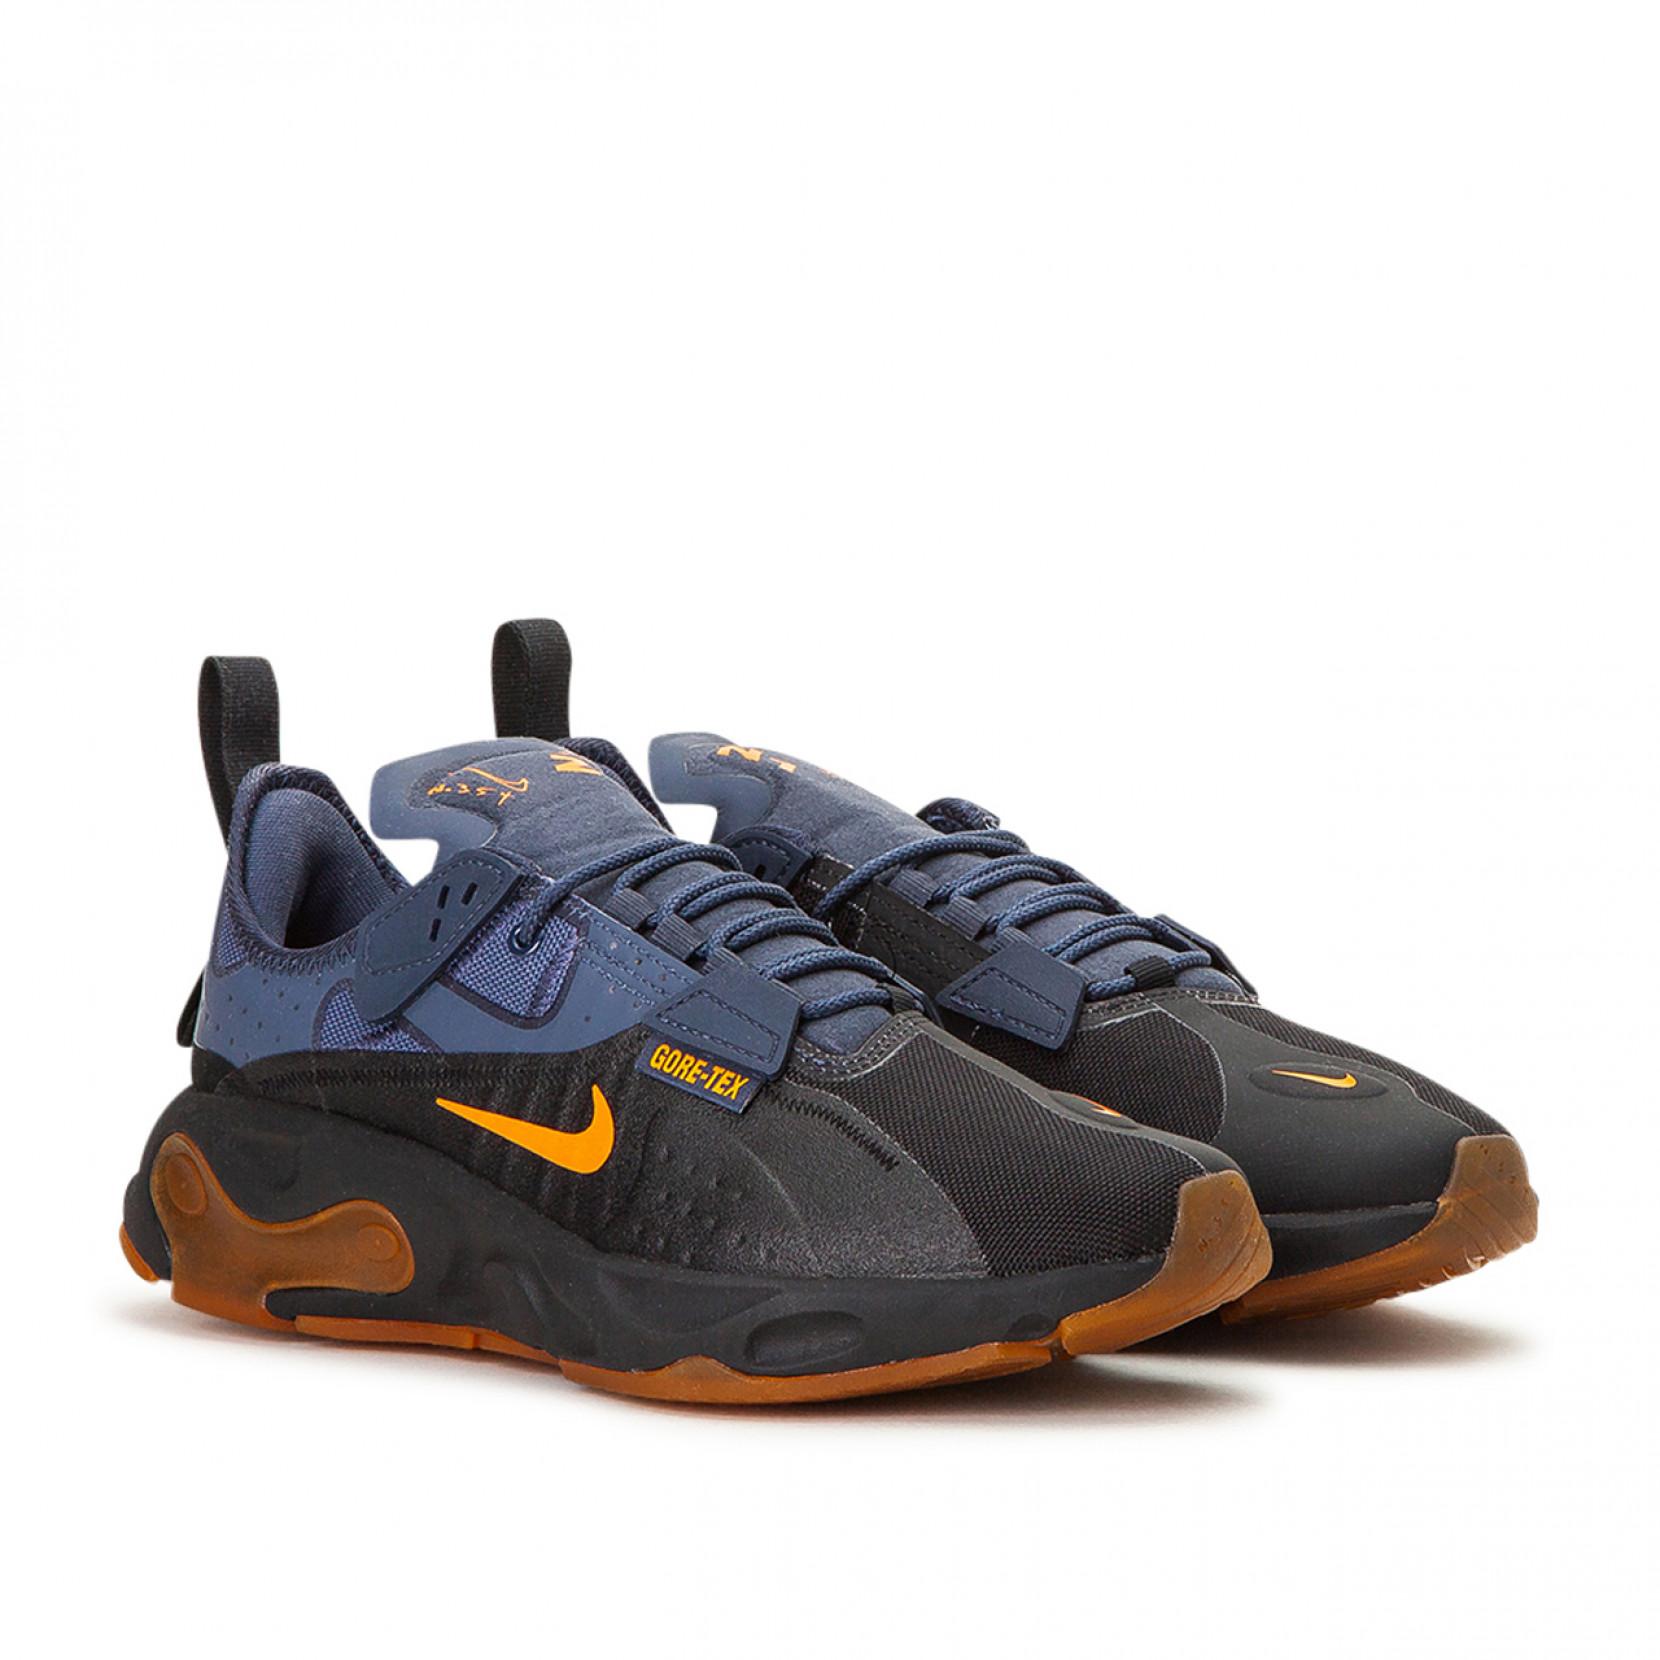 Nike Synthetic React-type Gtx Shoe (black) - Clearance Sale for 